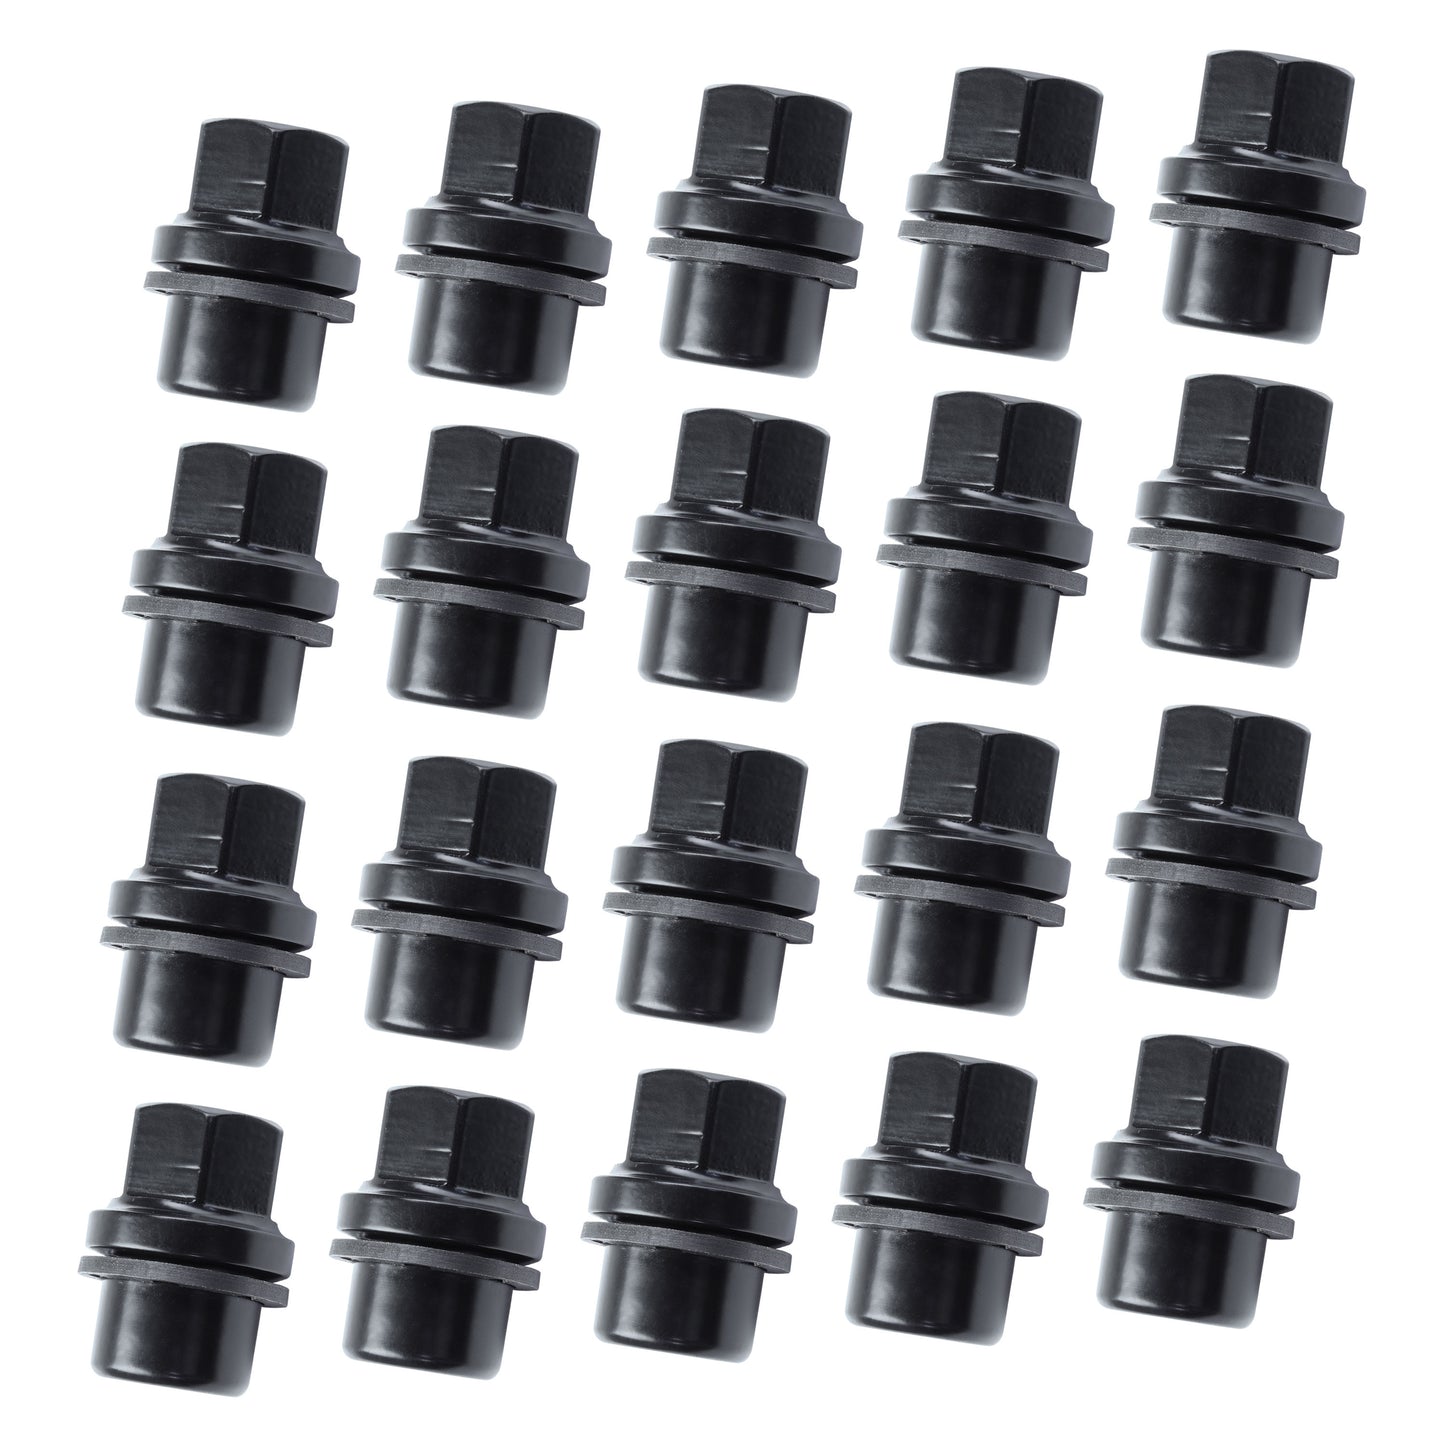 Black Alloy Wheel Nuts 20pc kit for Land Rover Classic Defender - Alloy wheel type